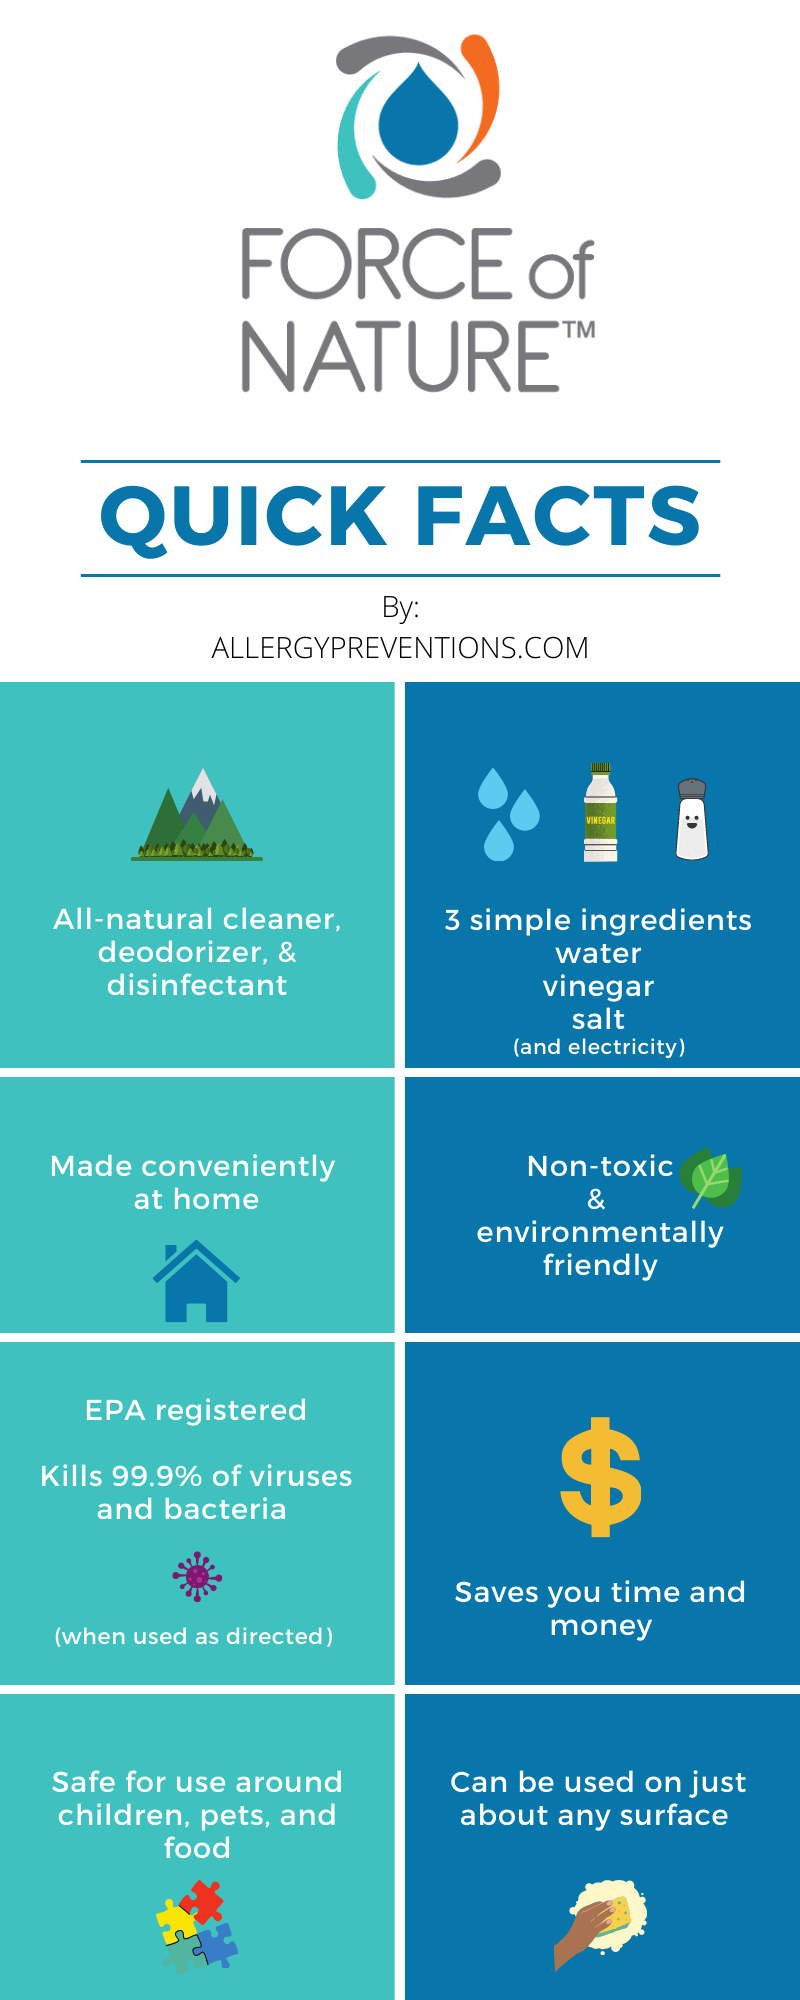 force-of-nature-cleaner-quick-facts-infographic: all-natural cleaner, deodorizer and disinfectant, 3 simple ingredients water vinegar salt, made conveniently at home, non-toxic and environmentally friendly, EPA registered to kill 99.9% of viruses and bacteria, saves you time and money, safe for use around children, pets and food, can be used on just about any surface